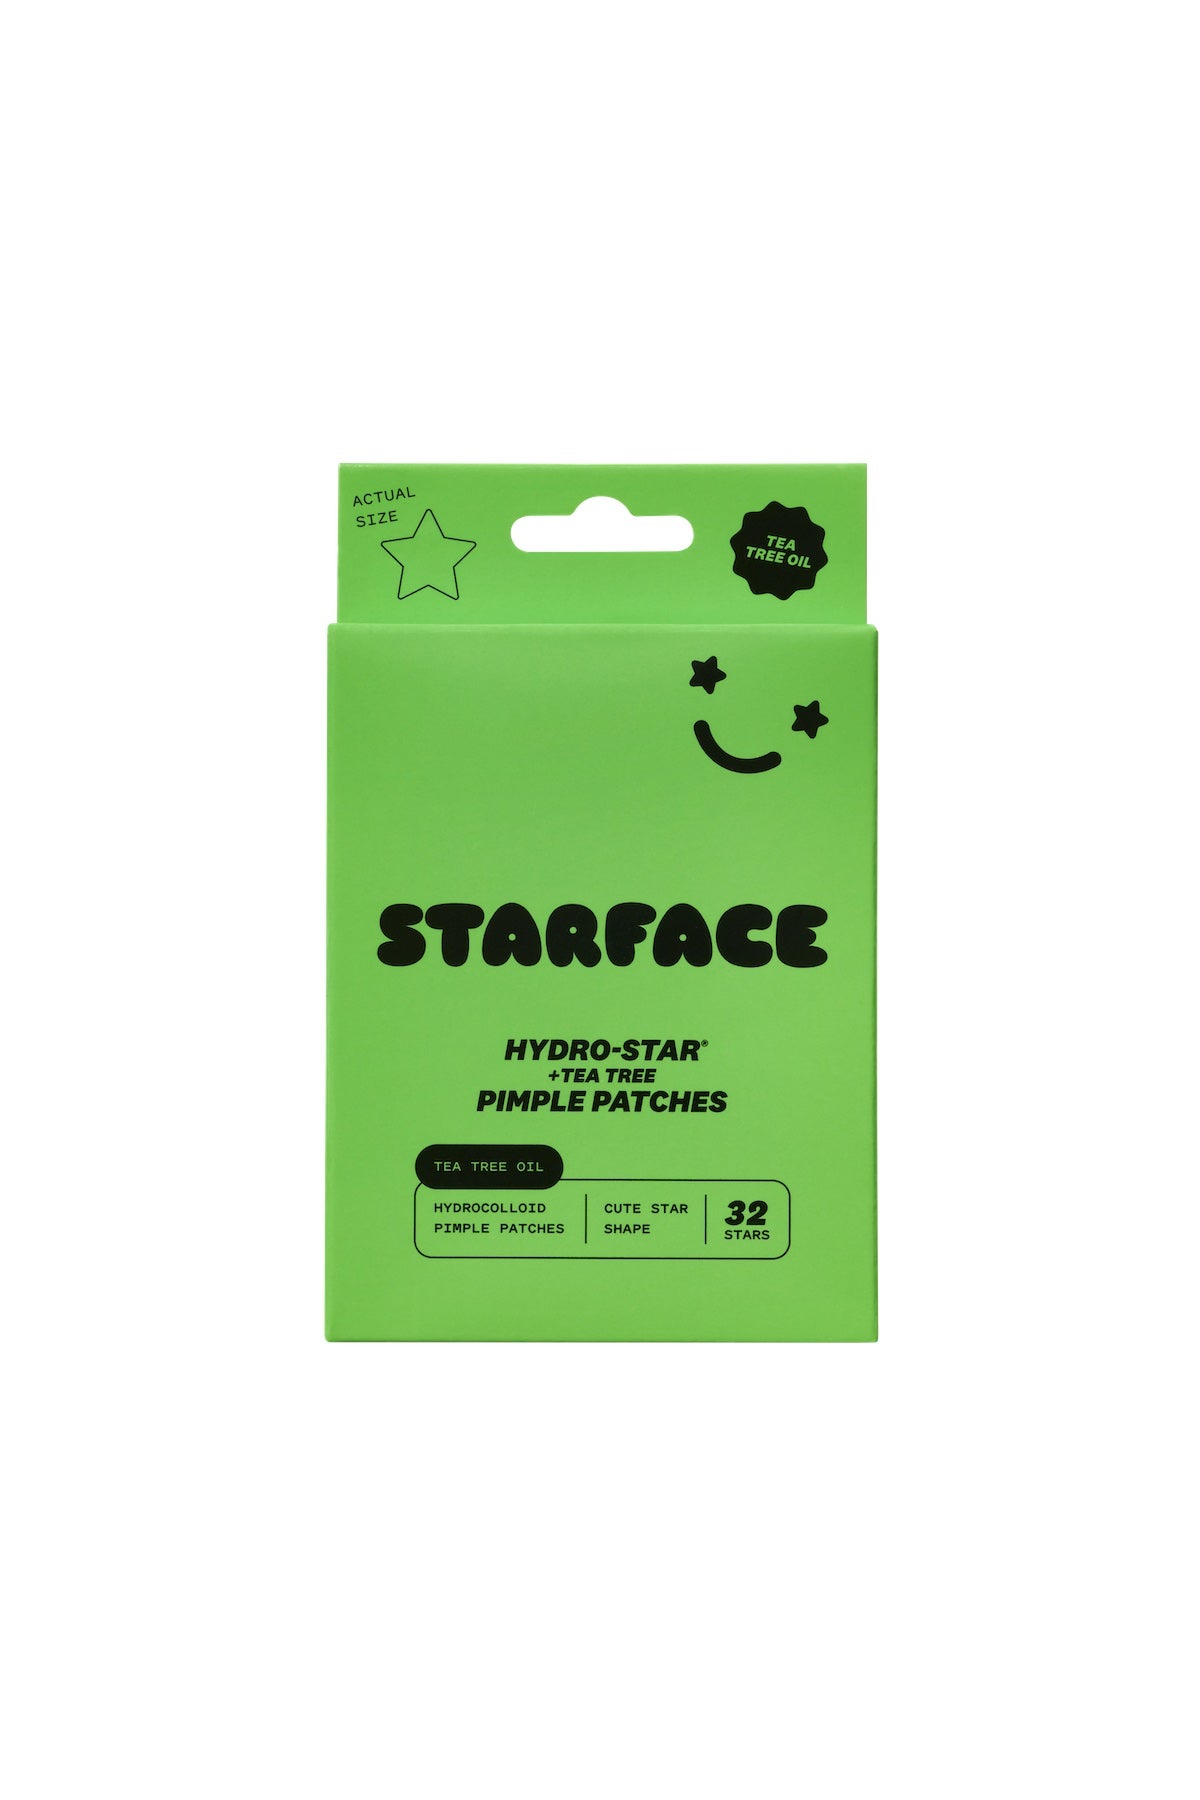 PinkPantheress Starred In New Starface Hydro-Star® Campaign